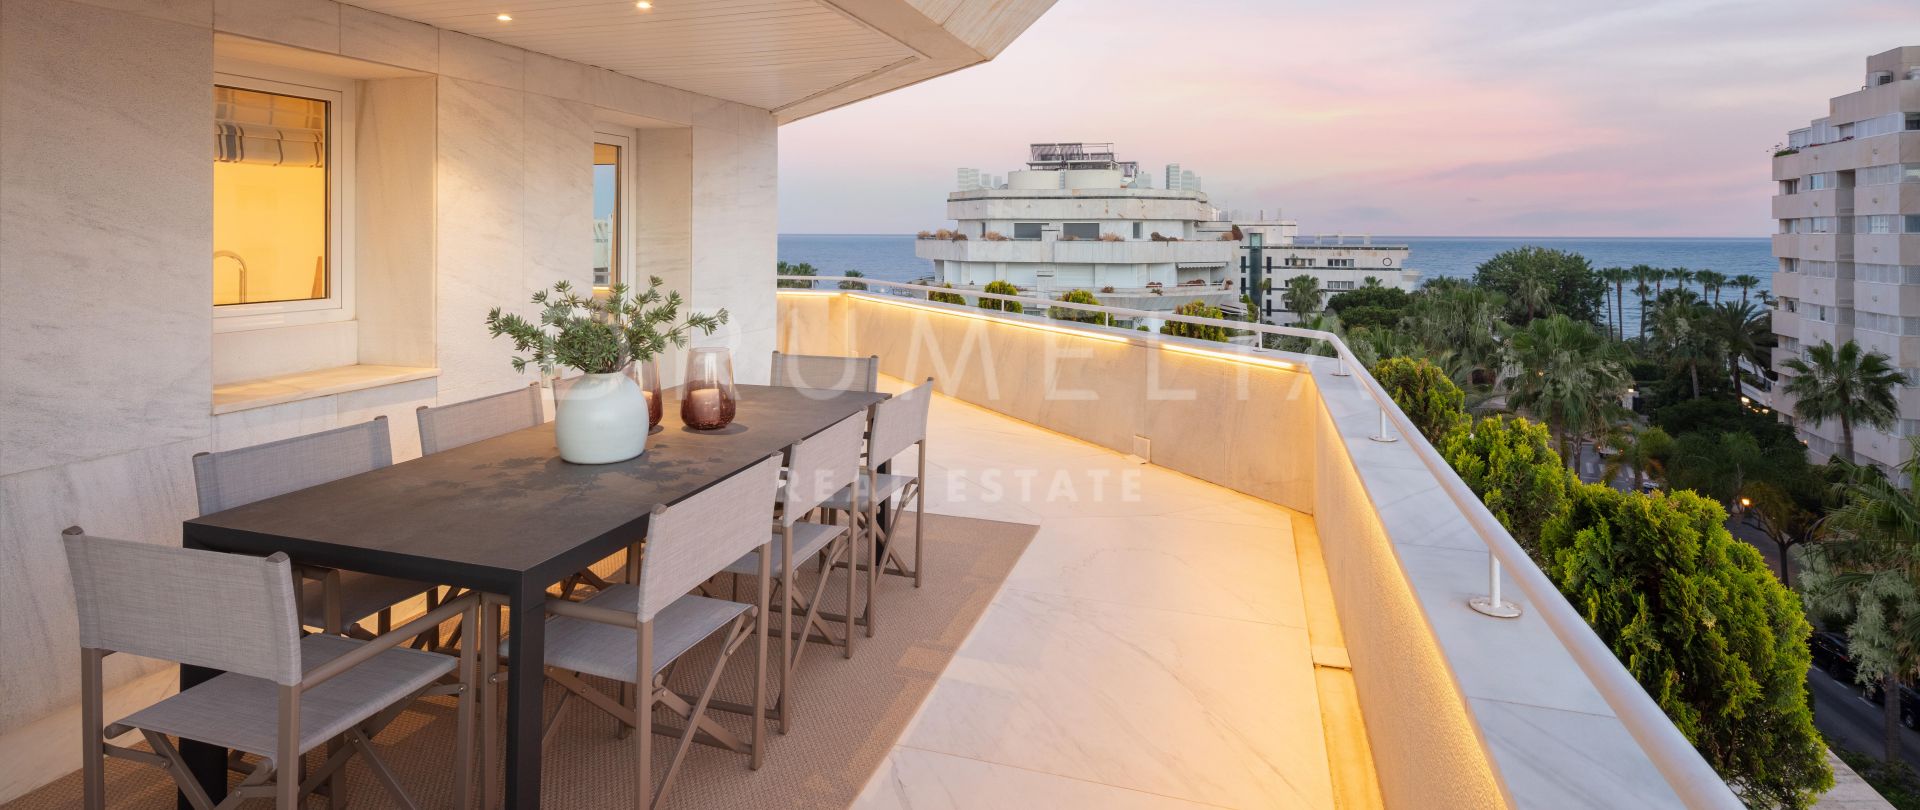 Poseidon 1 - Beautiful high-end duplex penthouse with sweeping sea views, Marbella Golden Mile